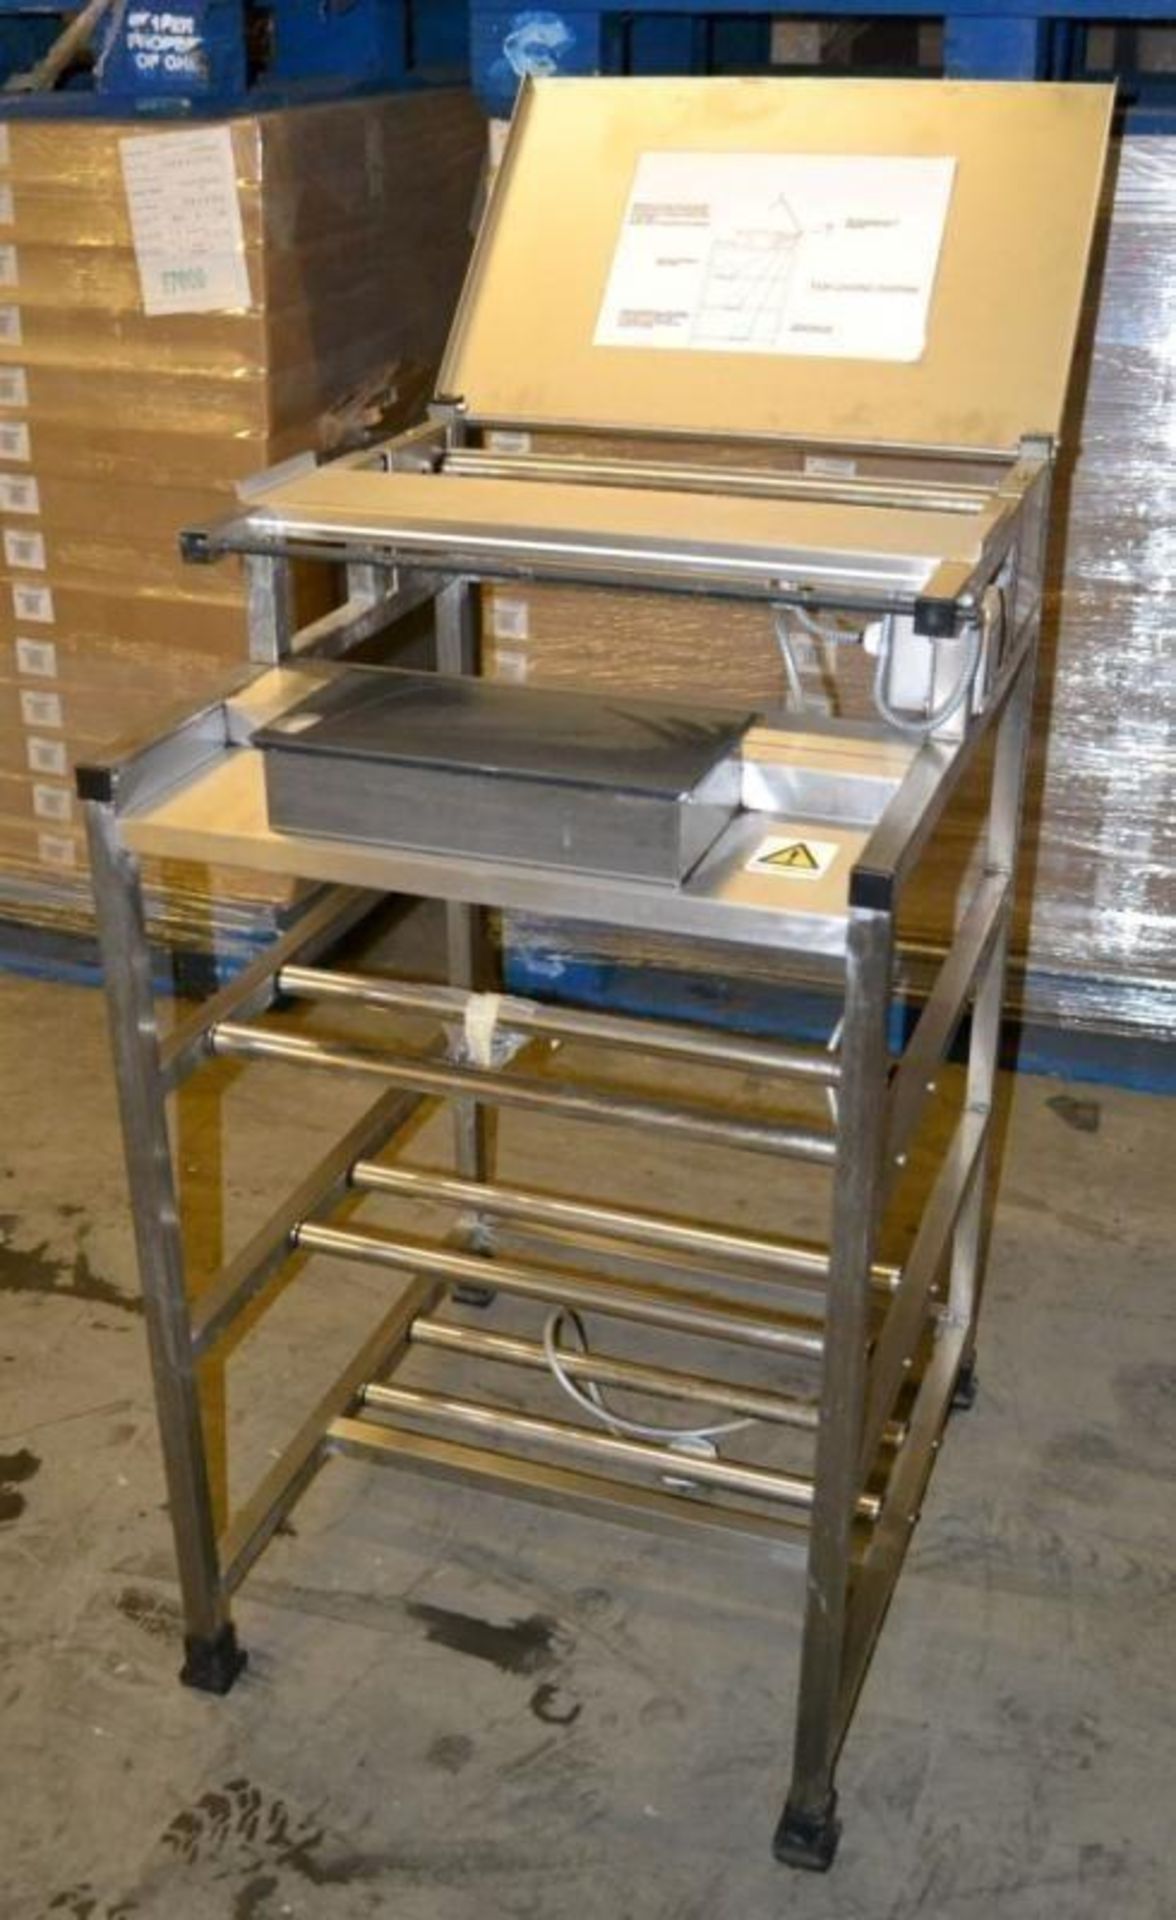 1 x Metalcraft Tray Stretch Wrapping Machine - Dimensions: 56 x 61.5 x 94.5cm - Ref: MC139 - CL282 - - Image 4 of 10